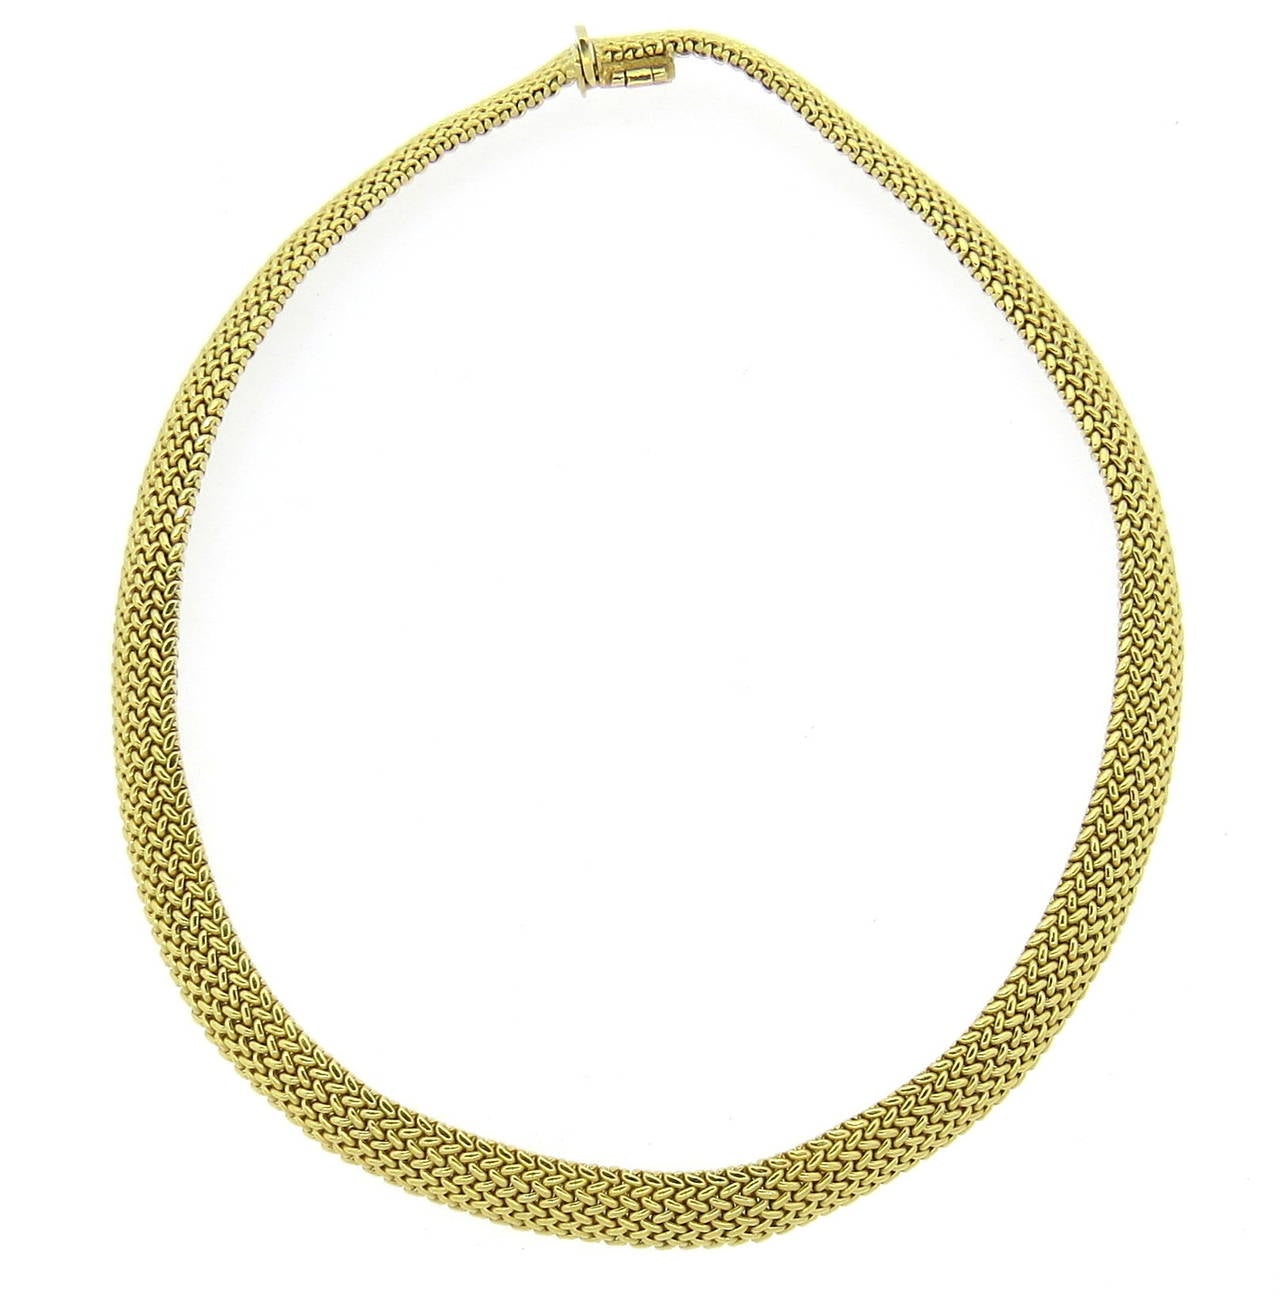 Tiffany & Co. 18k gold Somerset necklace, measuring 16 1/4